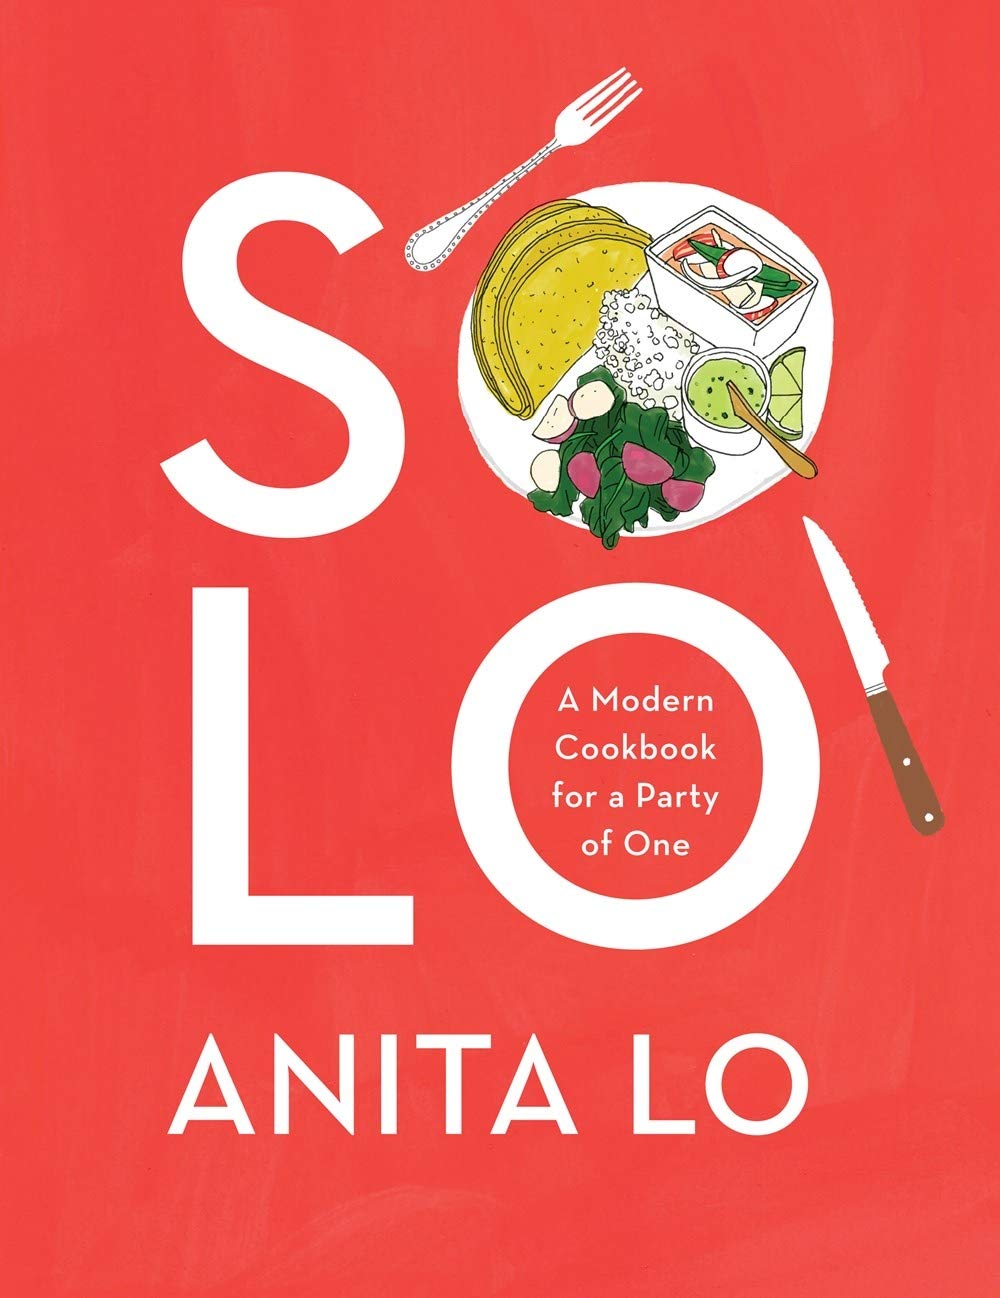 Solo: A Modern Cookbook for a Party of One by Anita Lo